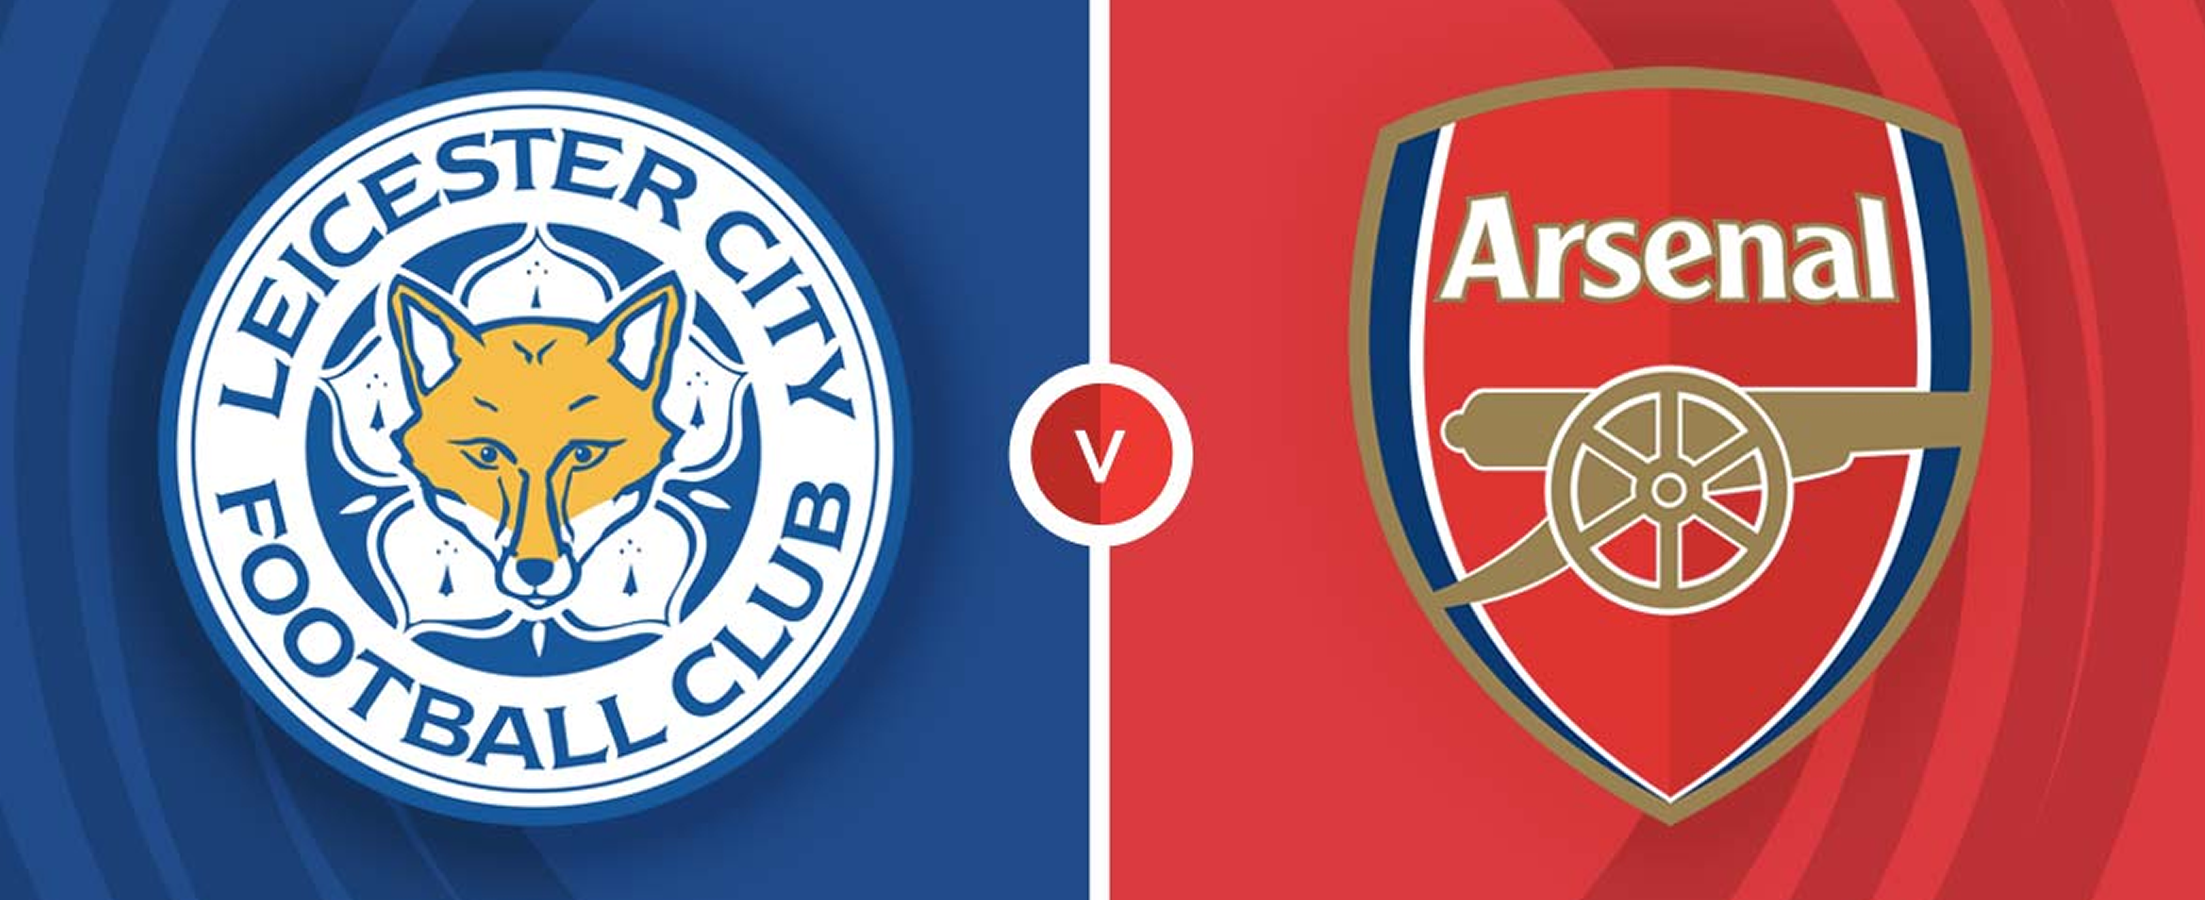 Leicester City v Arsenal English Premier League Match,Team News,Goal Scorers and Stats